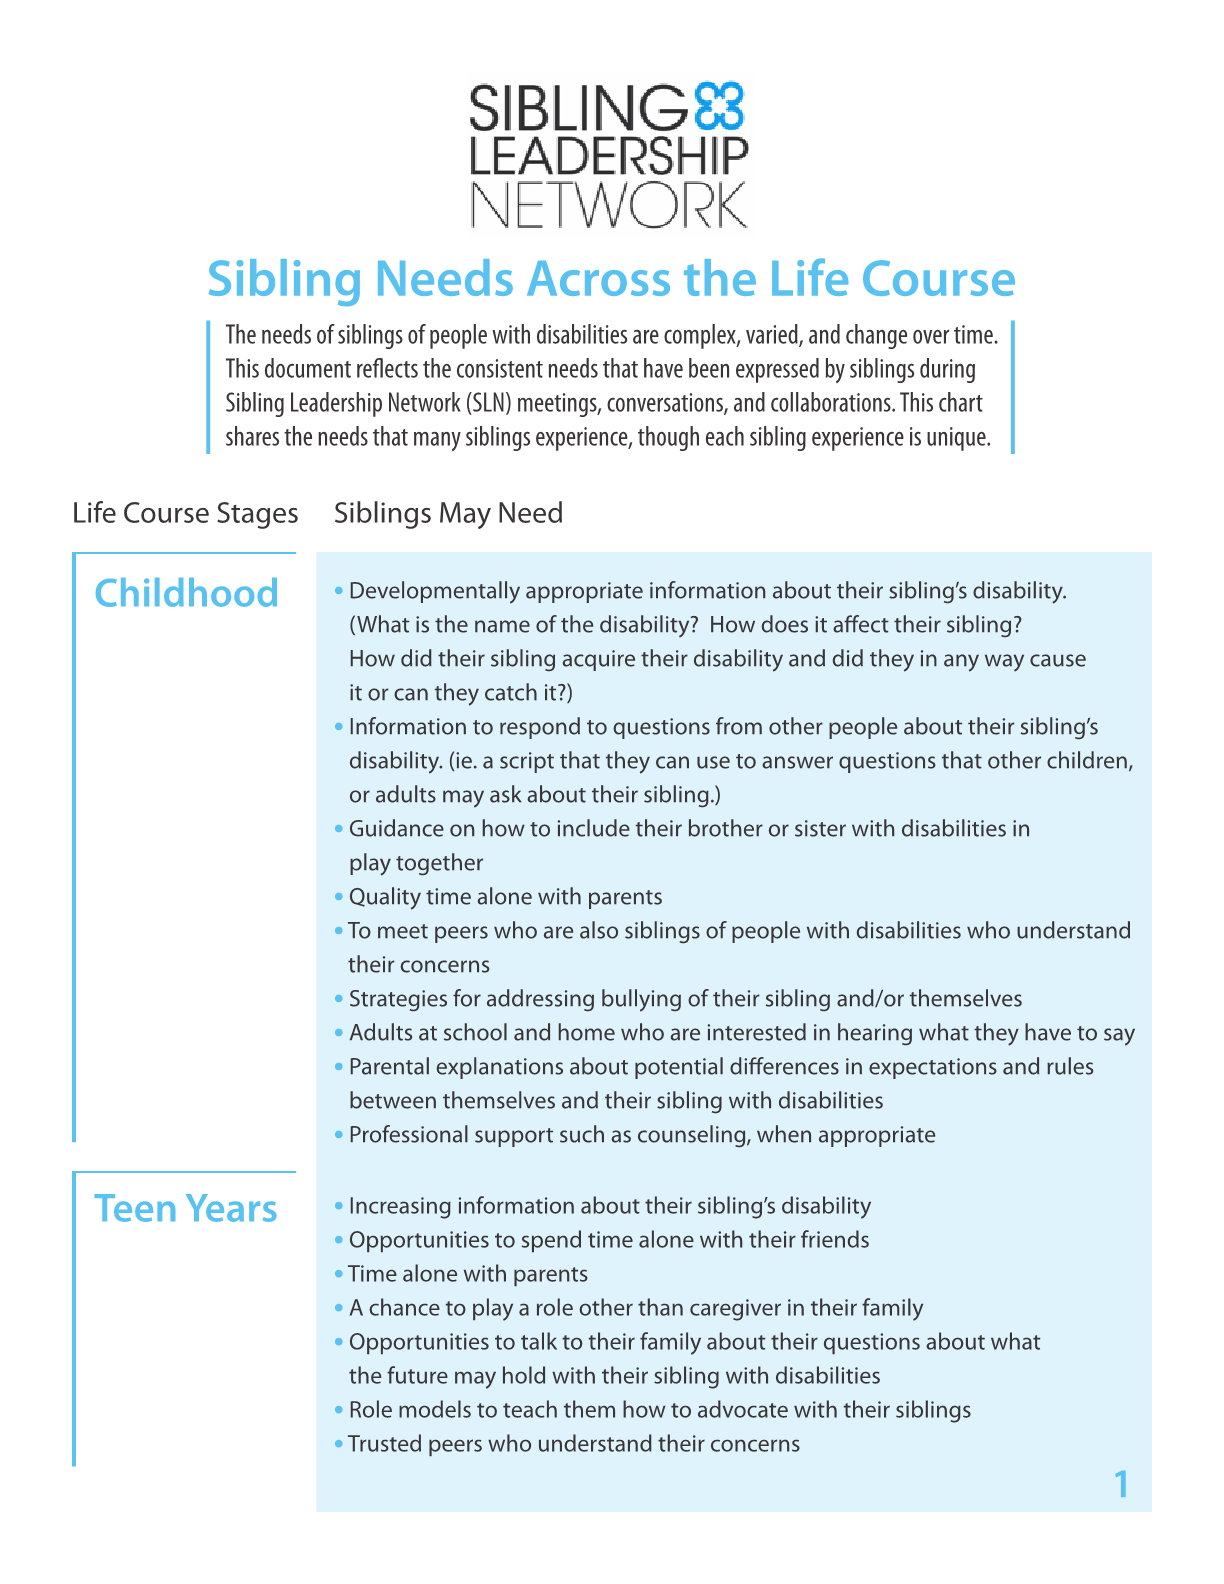 Siblings Needs Across the Life Course